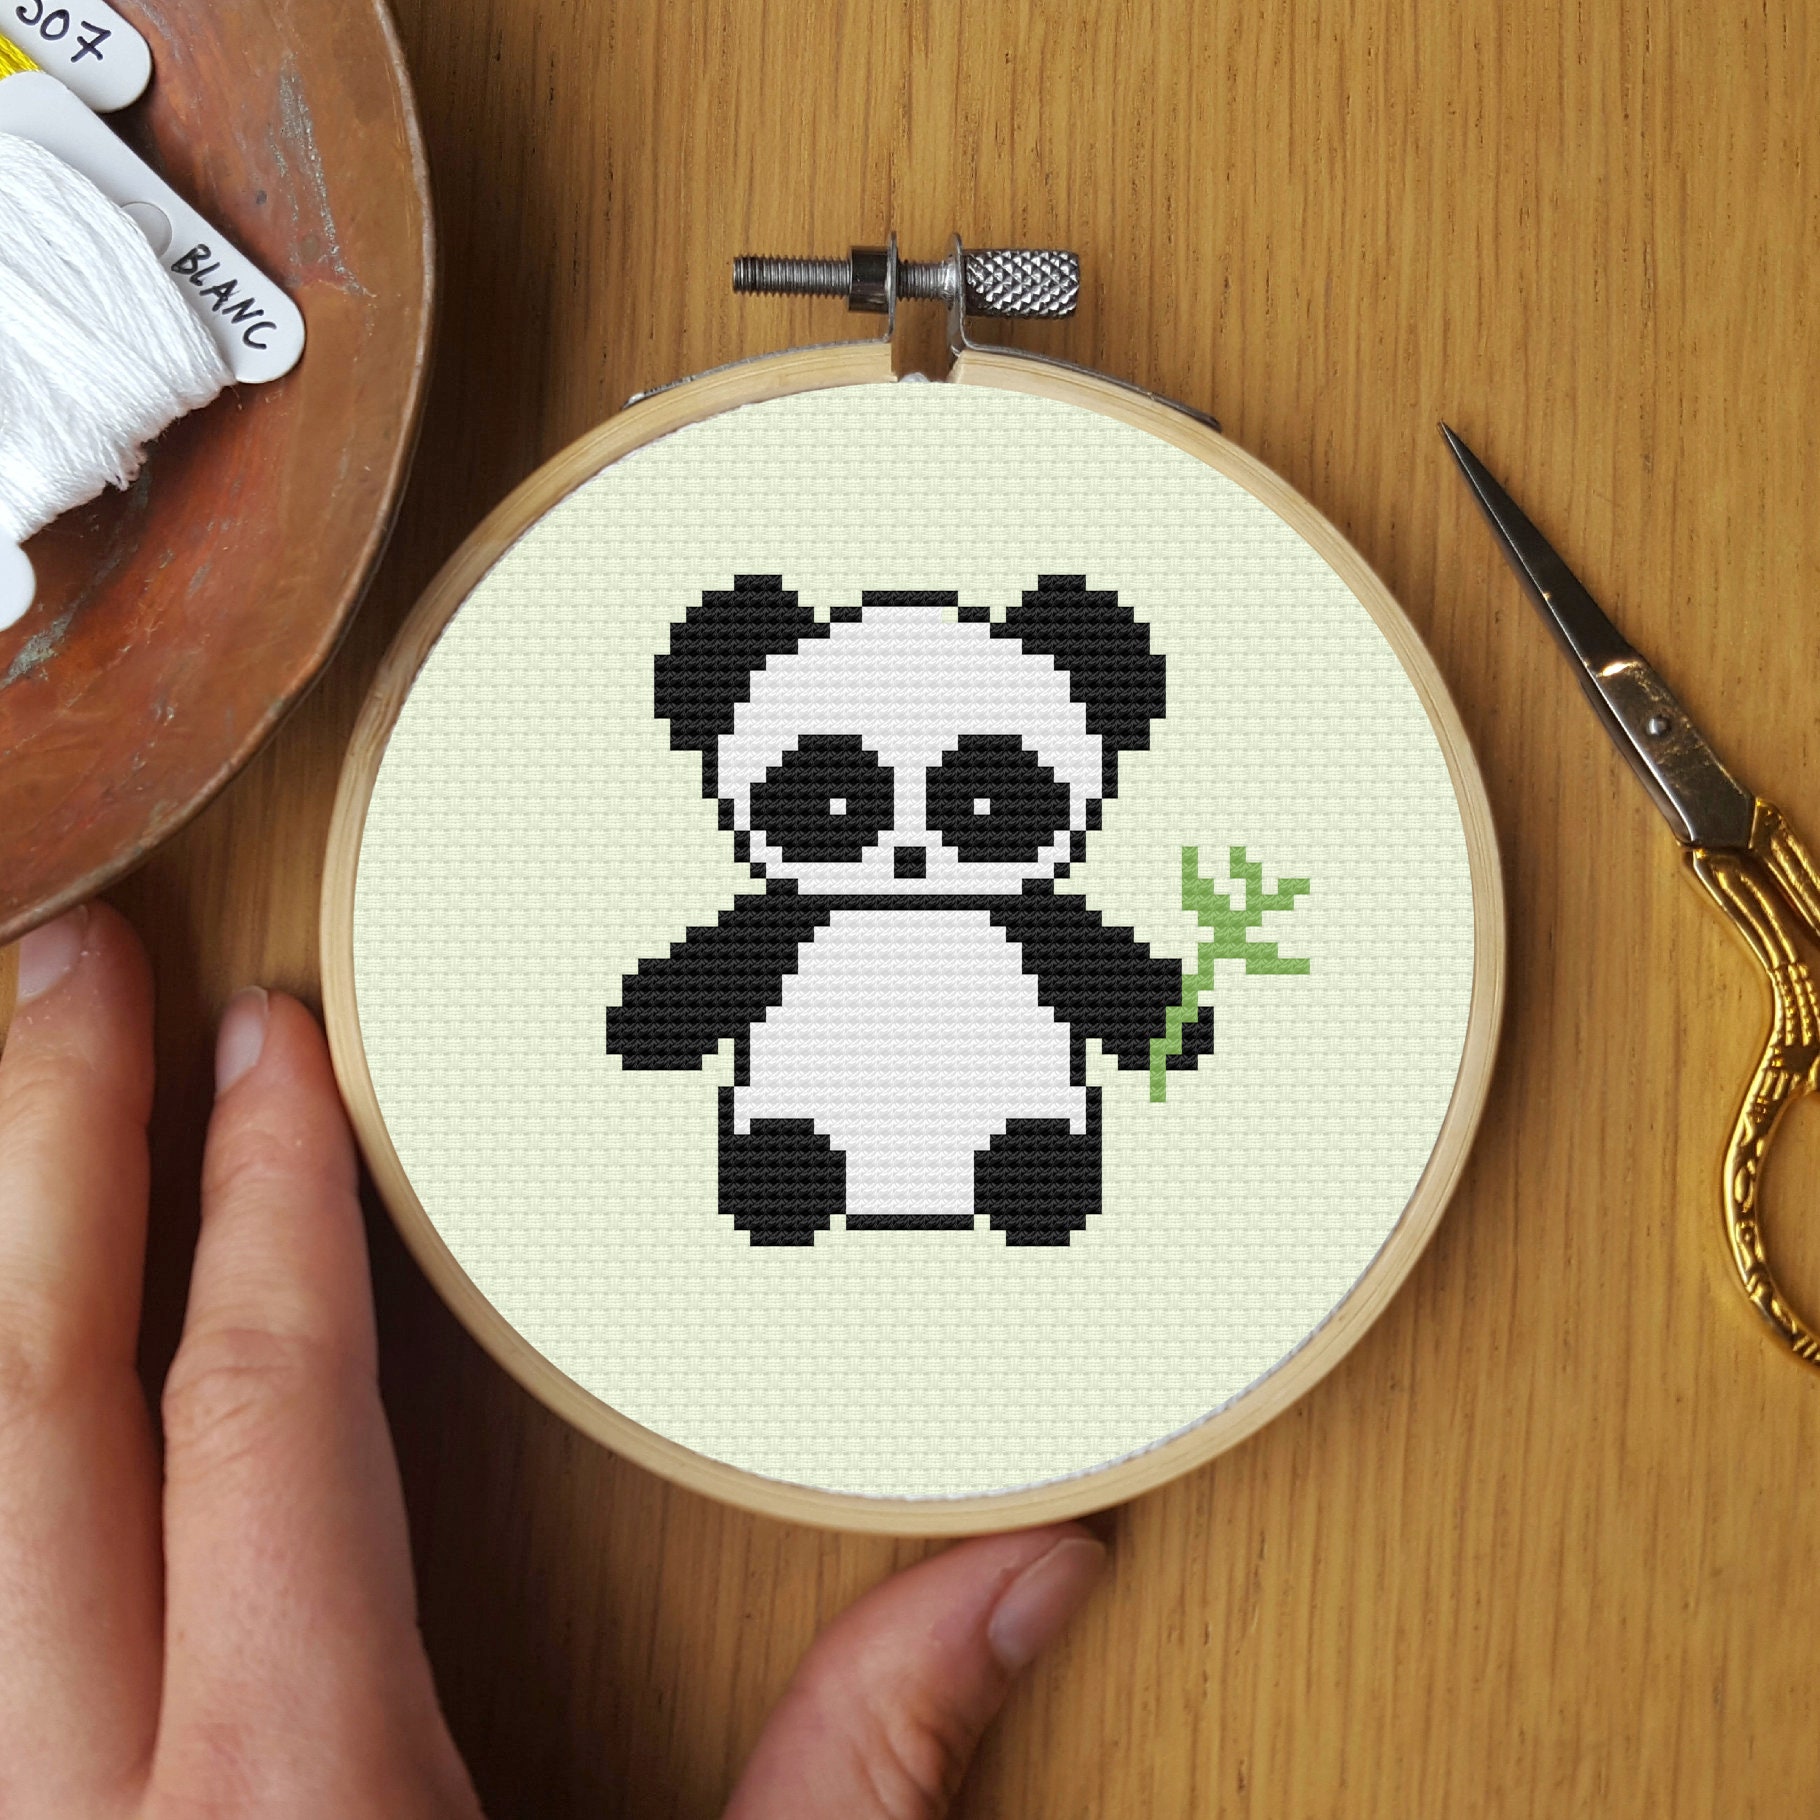 Cute cross stitch kit Baby Panda - Beginners embroidery with counted pattern